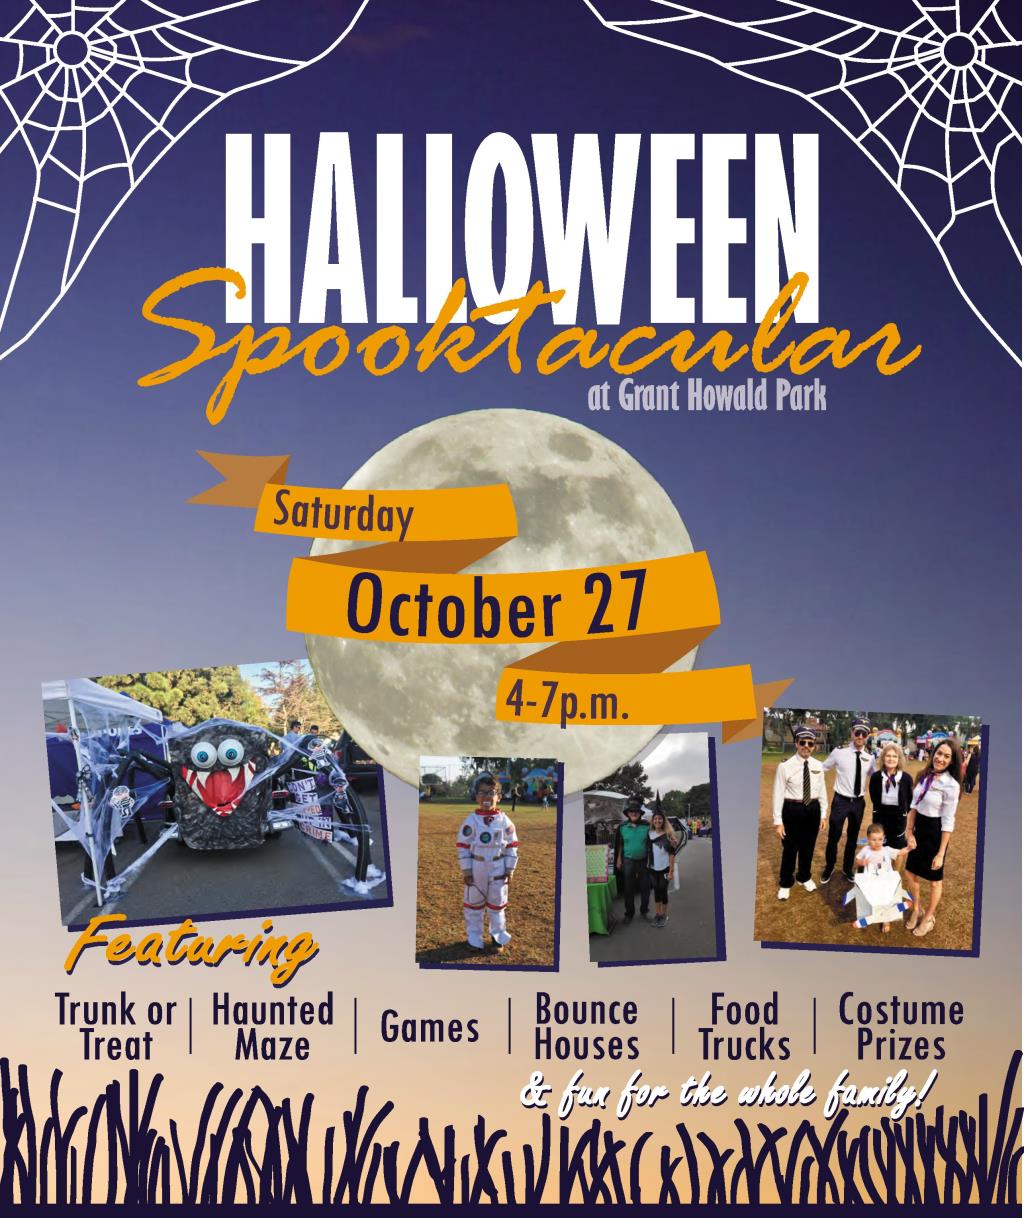 Spooktacular at Grant Howald Park, Halloween, Saturday October 27, 4-7 p.m., Featuring Trunk or Treat, Haunted Maze, Games, Bounce Houses, Food Trucks, Costume Prizes & fun for the whole family!